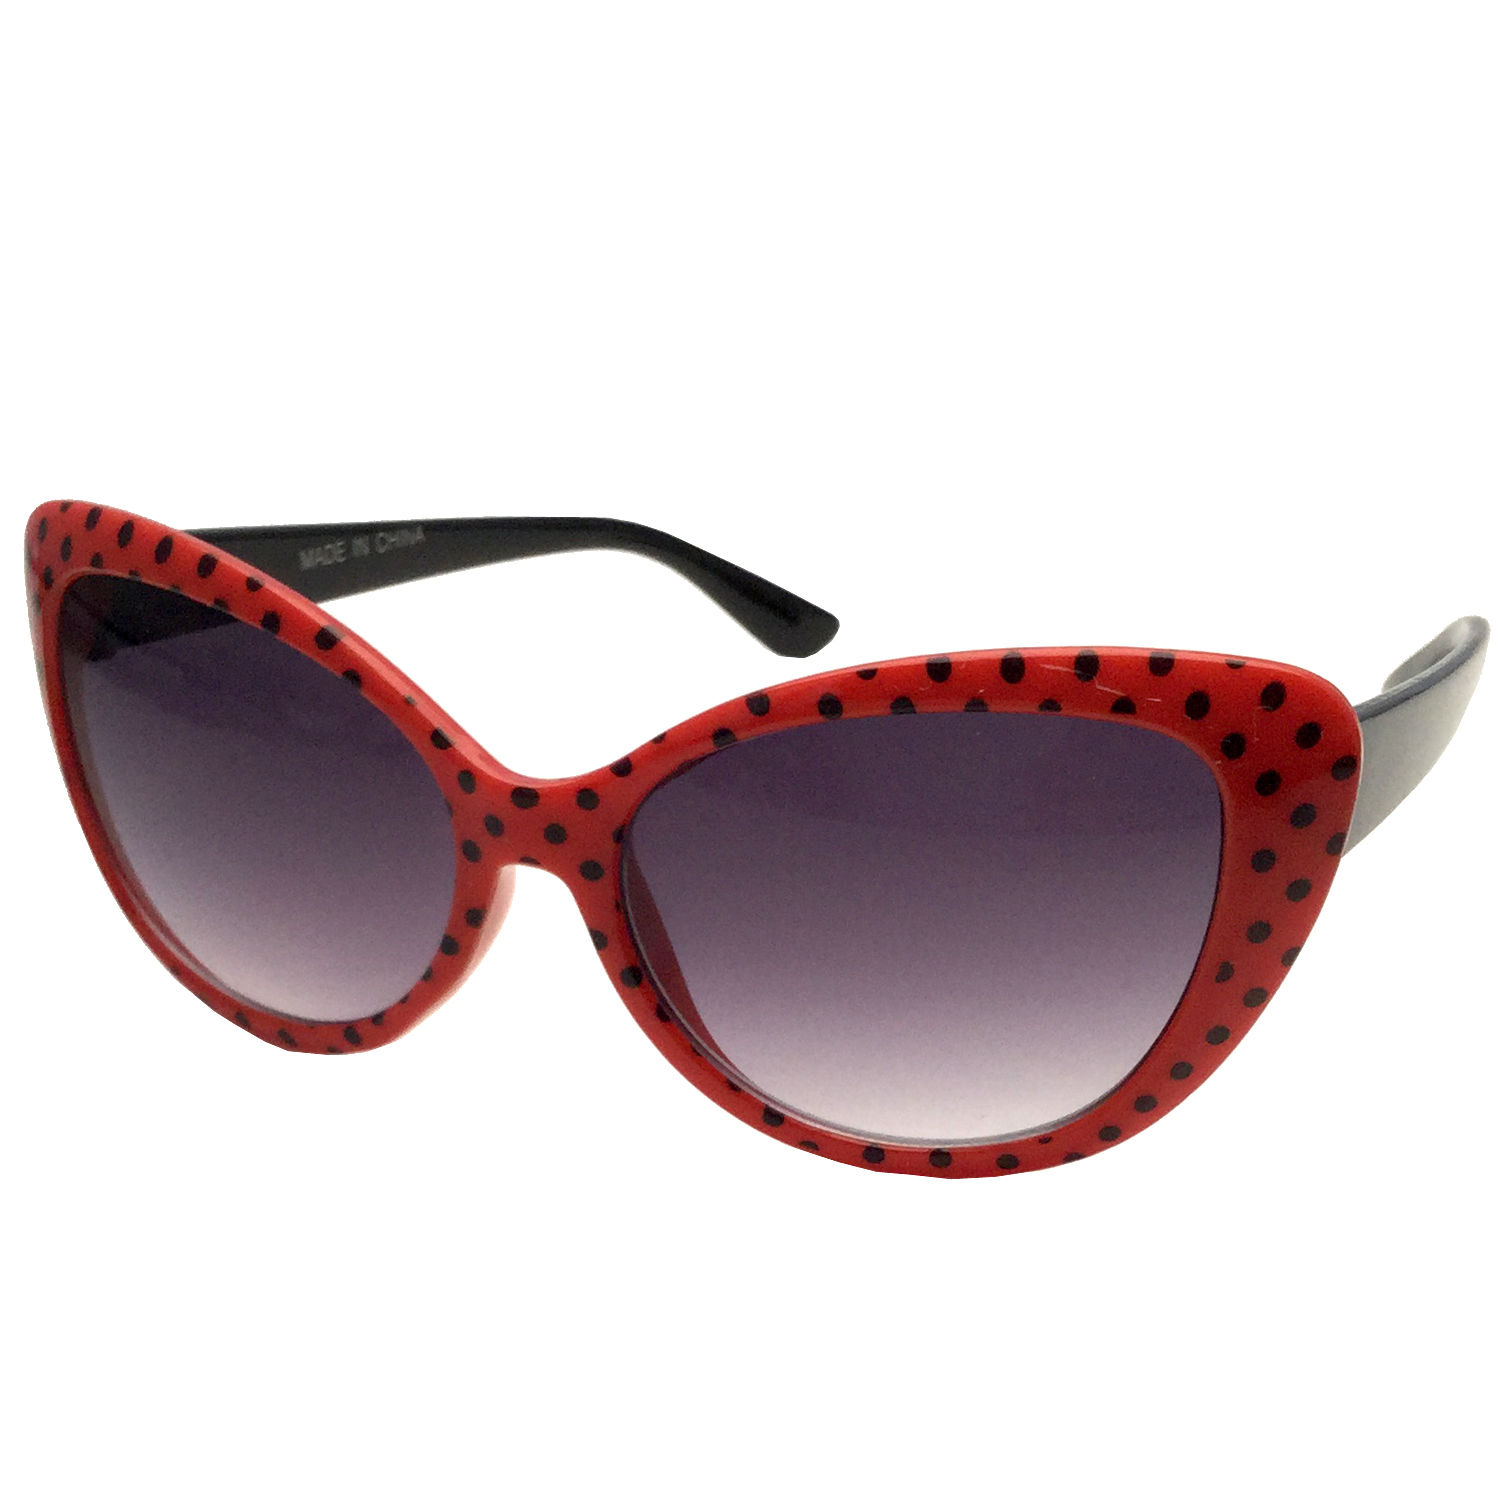 grinderPUNCH GIRLS Kids Fashion Sunglasses Cat Eye Polka Dot 50s/60s Retro Vintage Style Age 2-12 Red - image 1 of 5